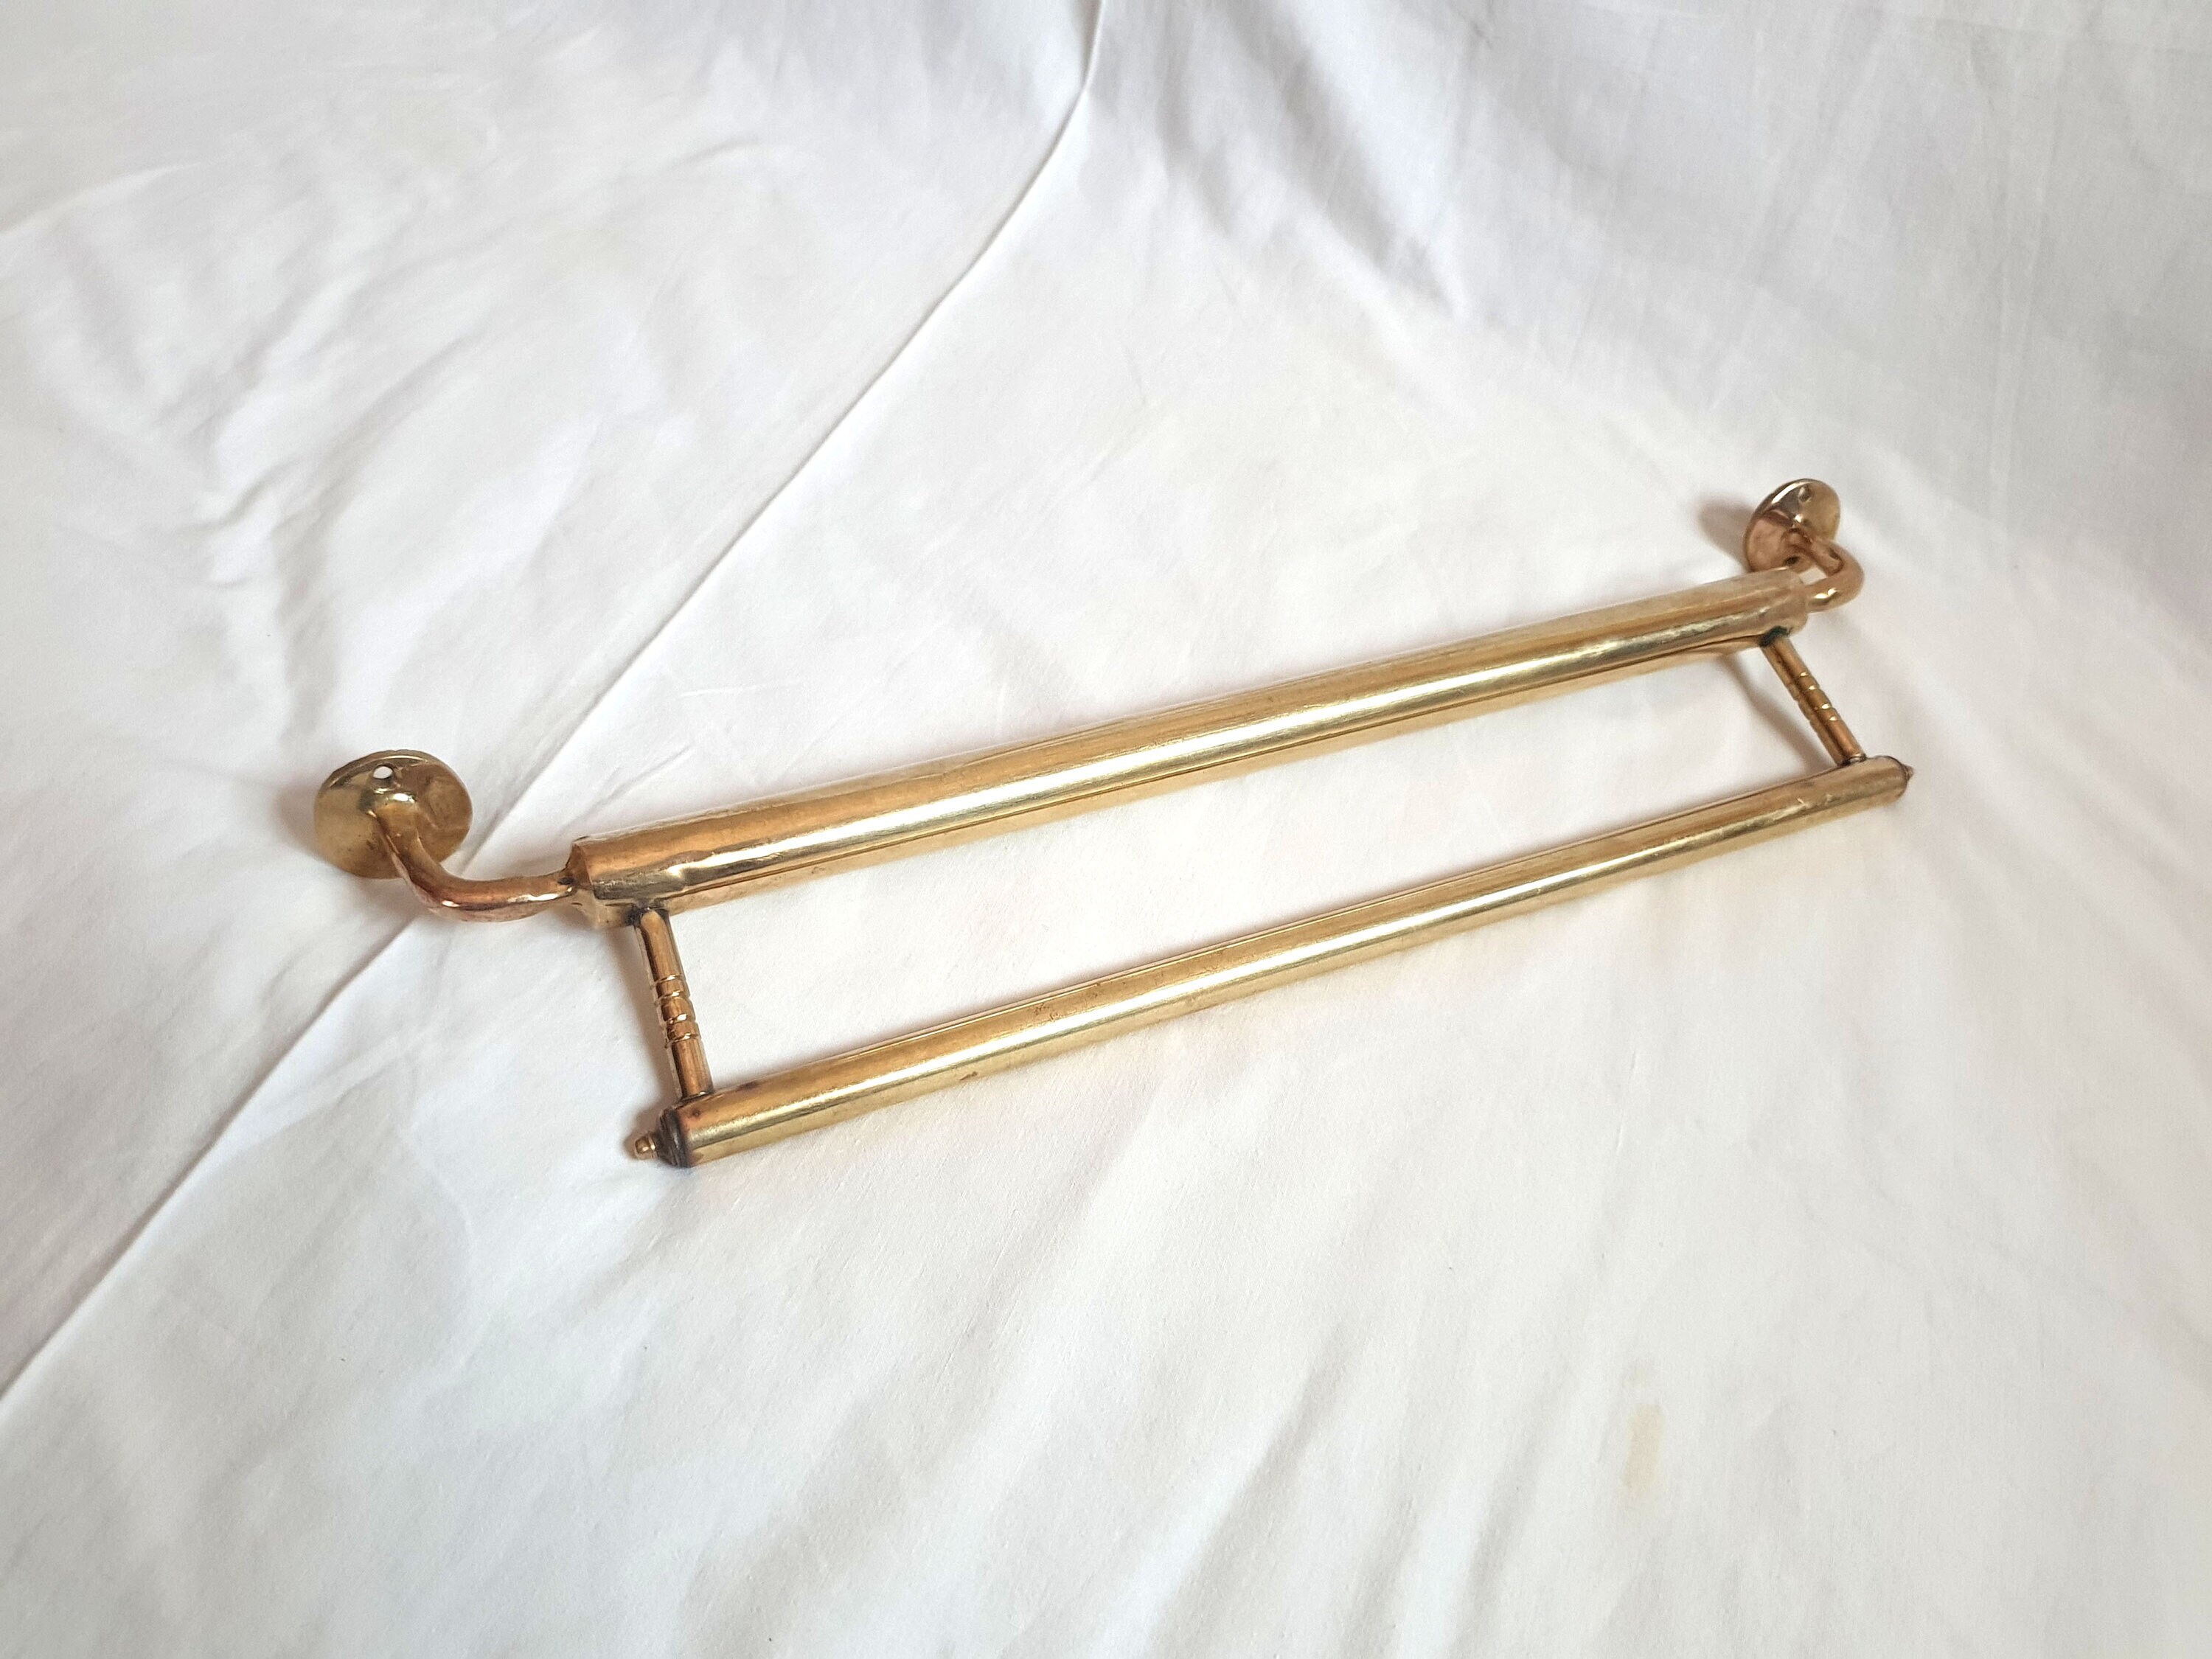 Double Brass Wall Mounted Towel Holder Bar Towel Bar Bathroom Accessories  Rustic Decor Kitchen Towel Bar Bathroom Decor 